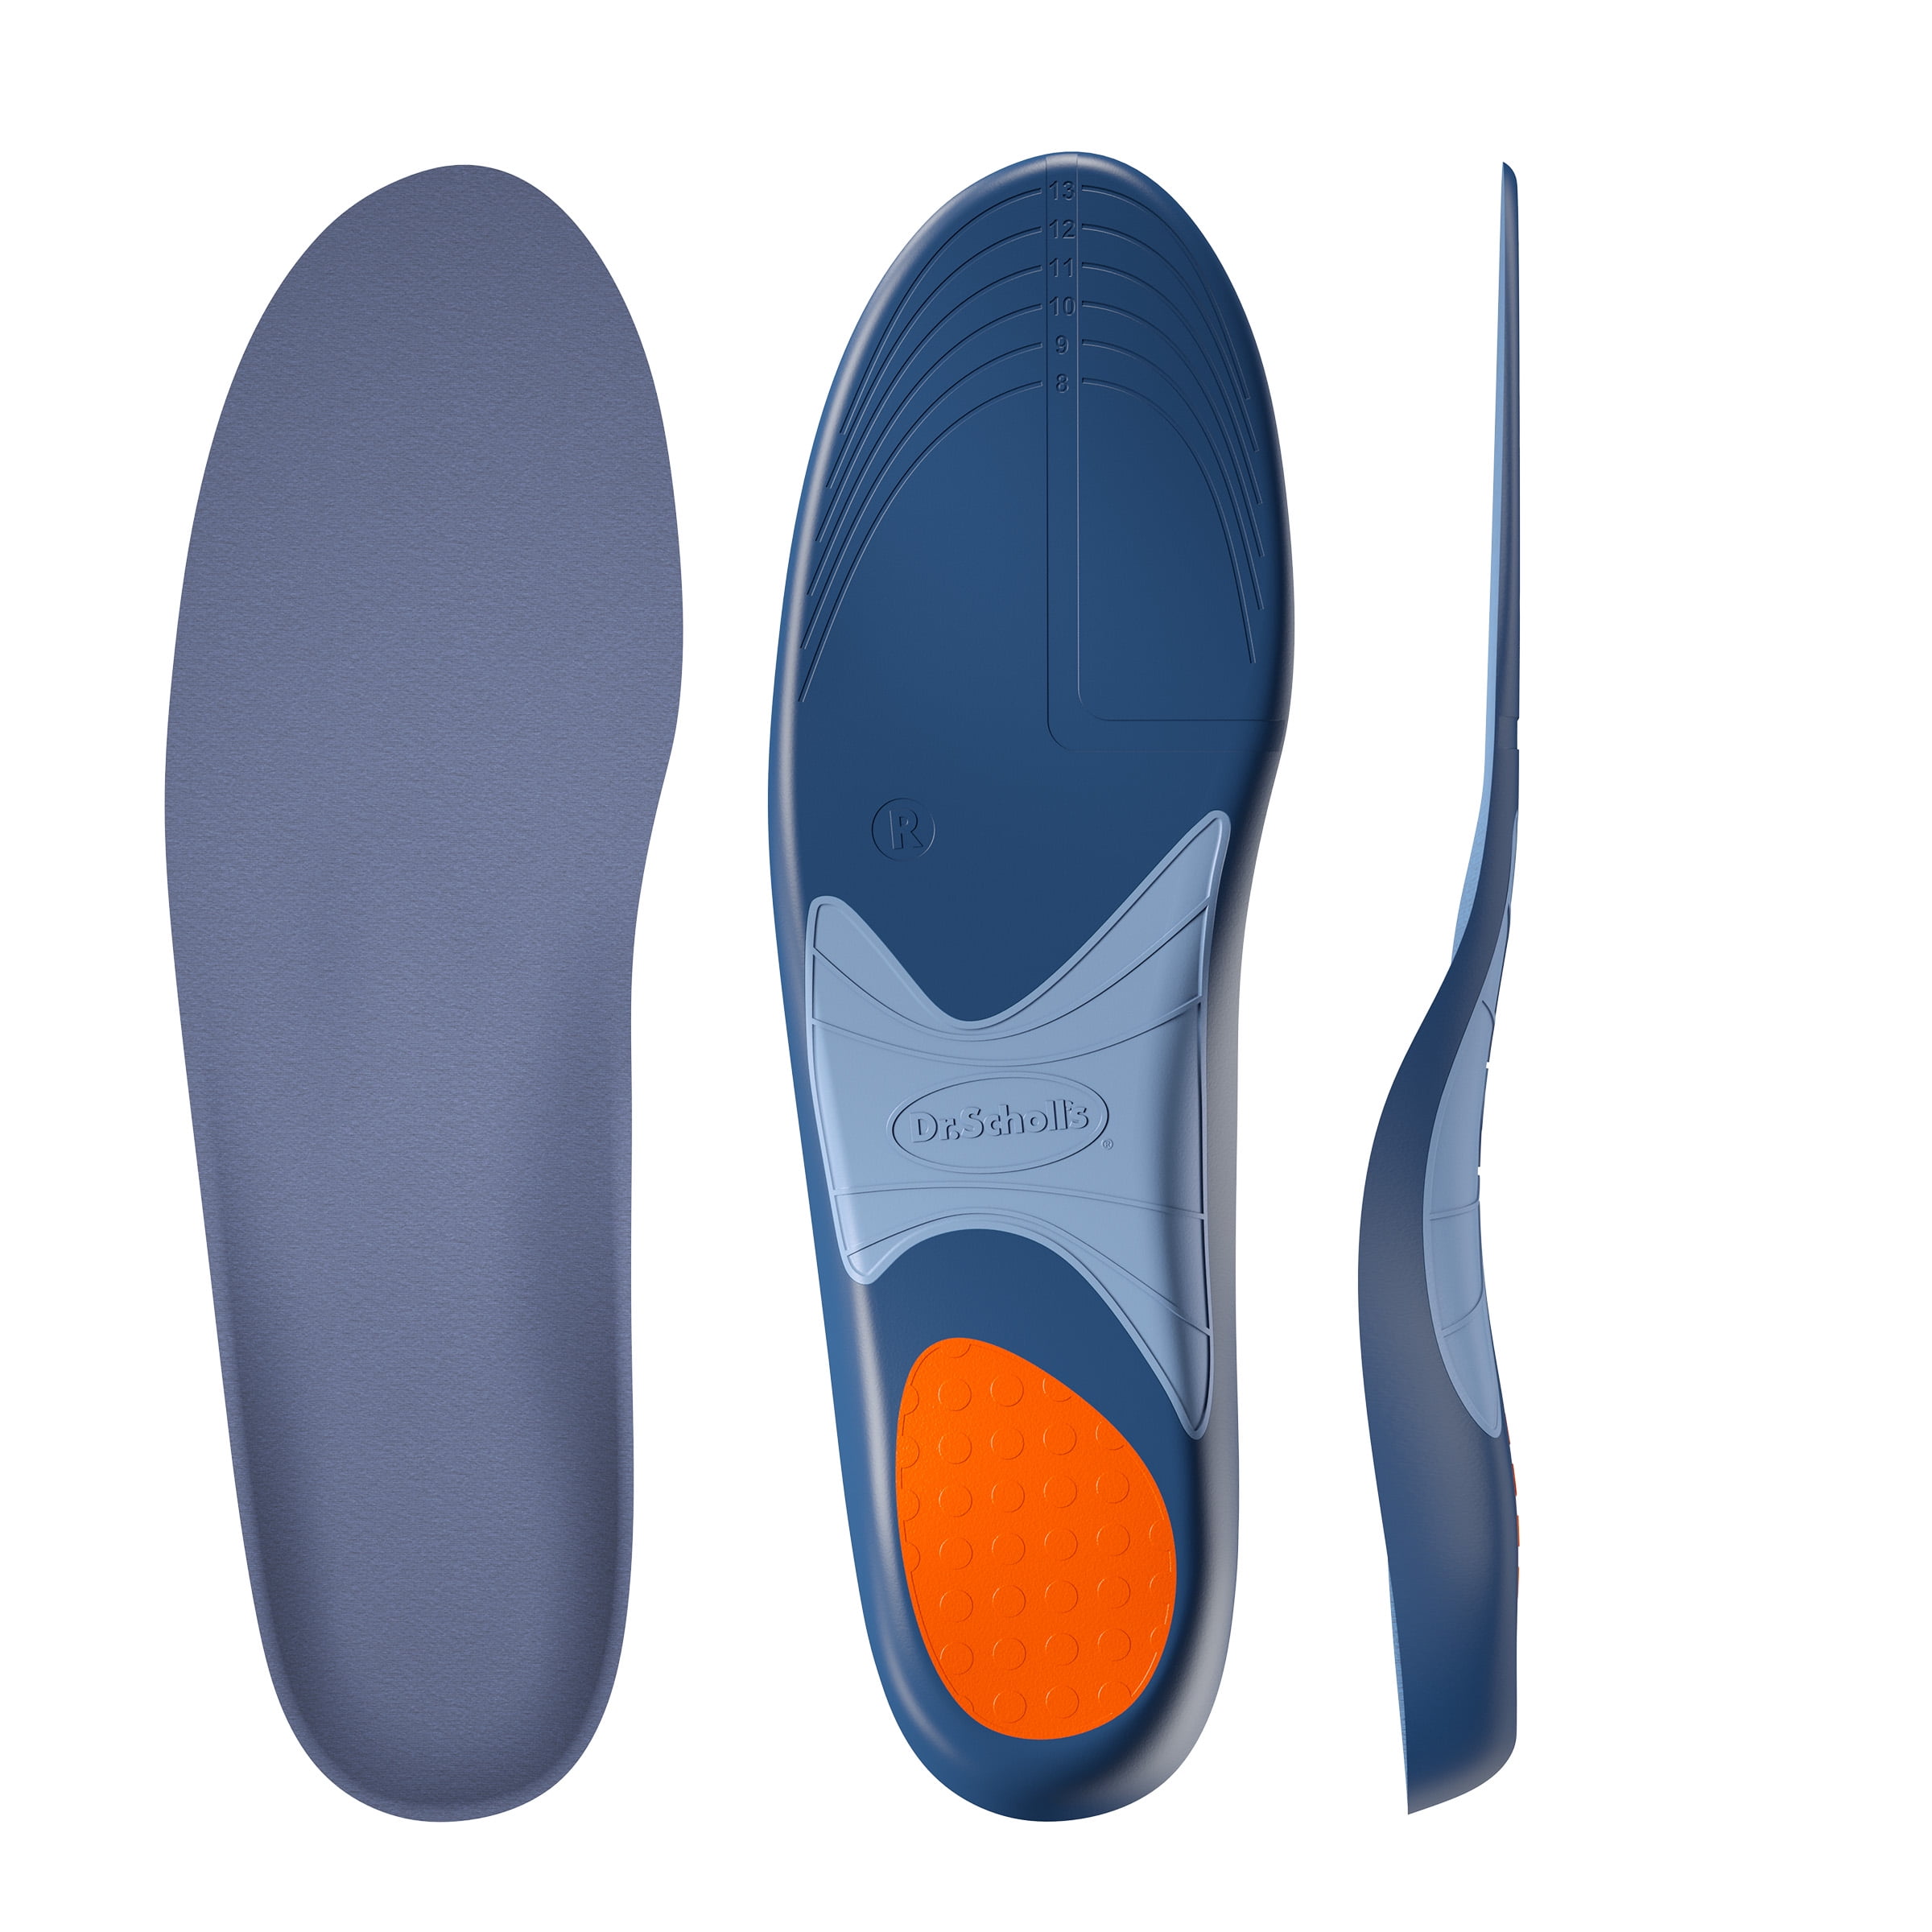 Dr. Scholl’s Pain Relief Orthotics for Heavy Duty Support for Men, 1 Pair,  Size 8-14